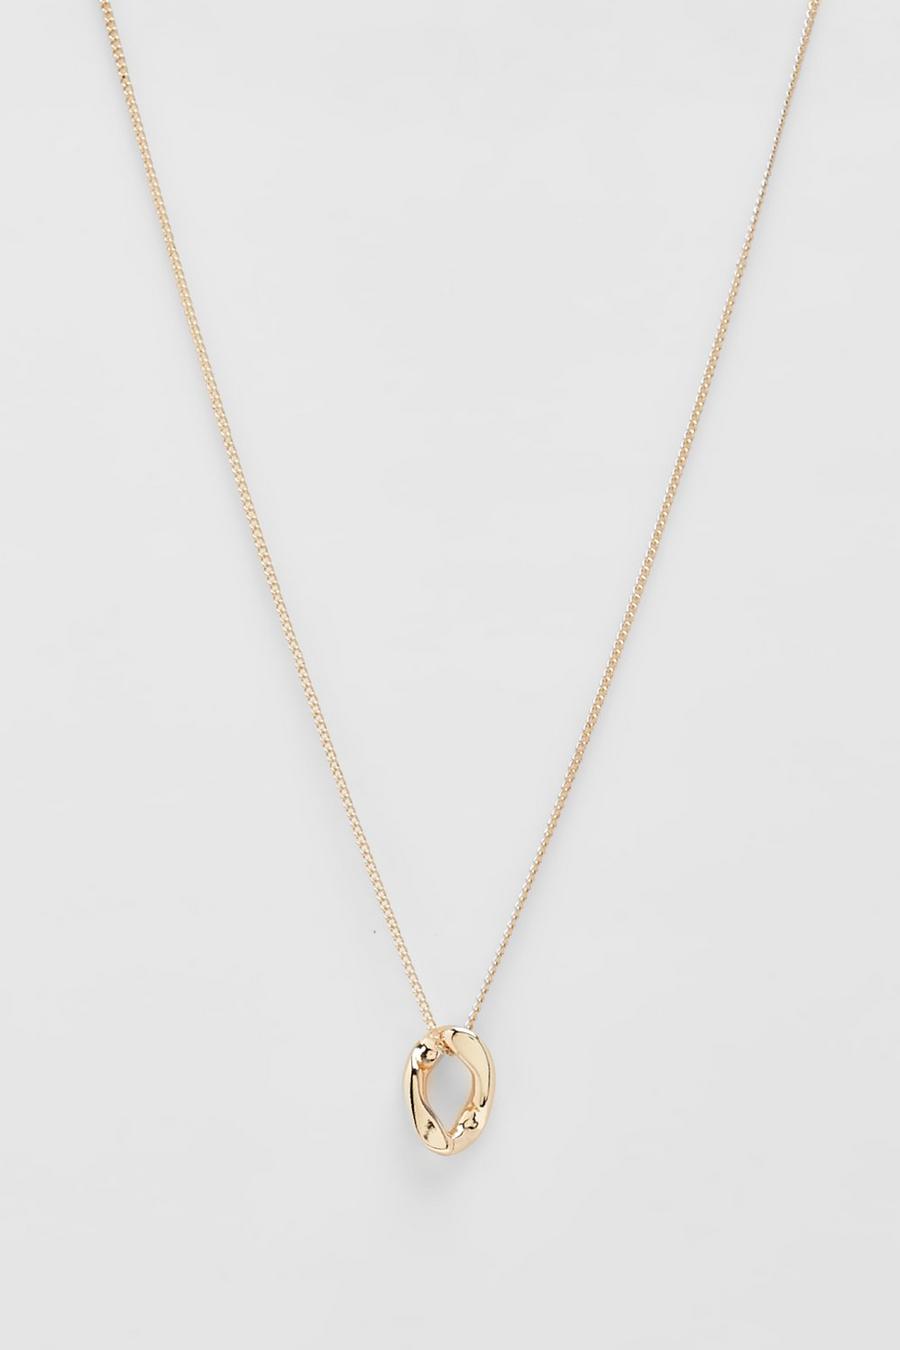 Gold metallic Hammered Oval Drop Necklace